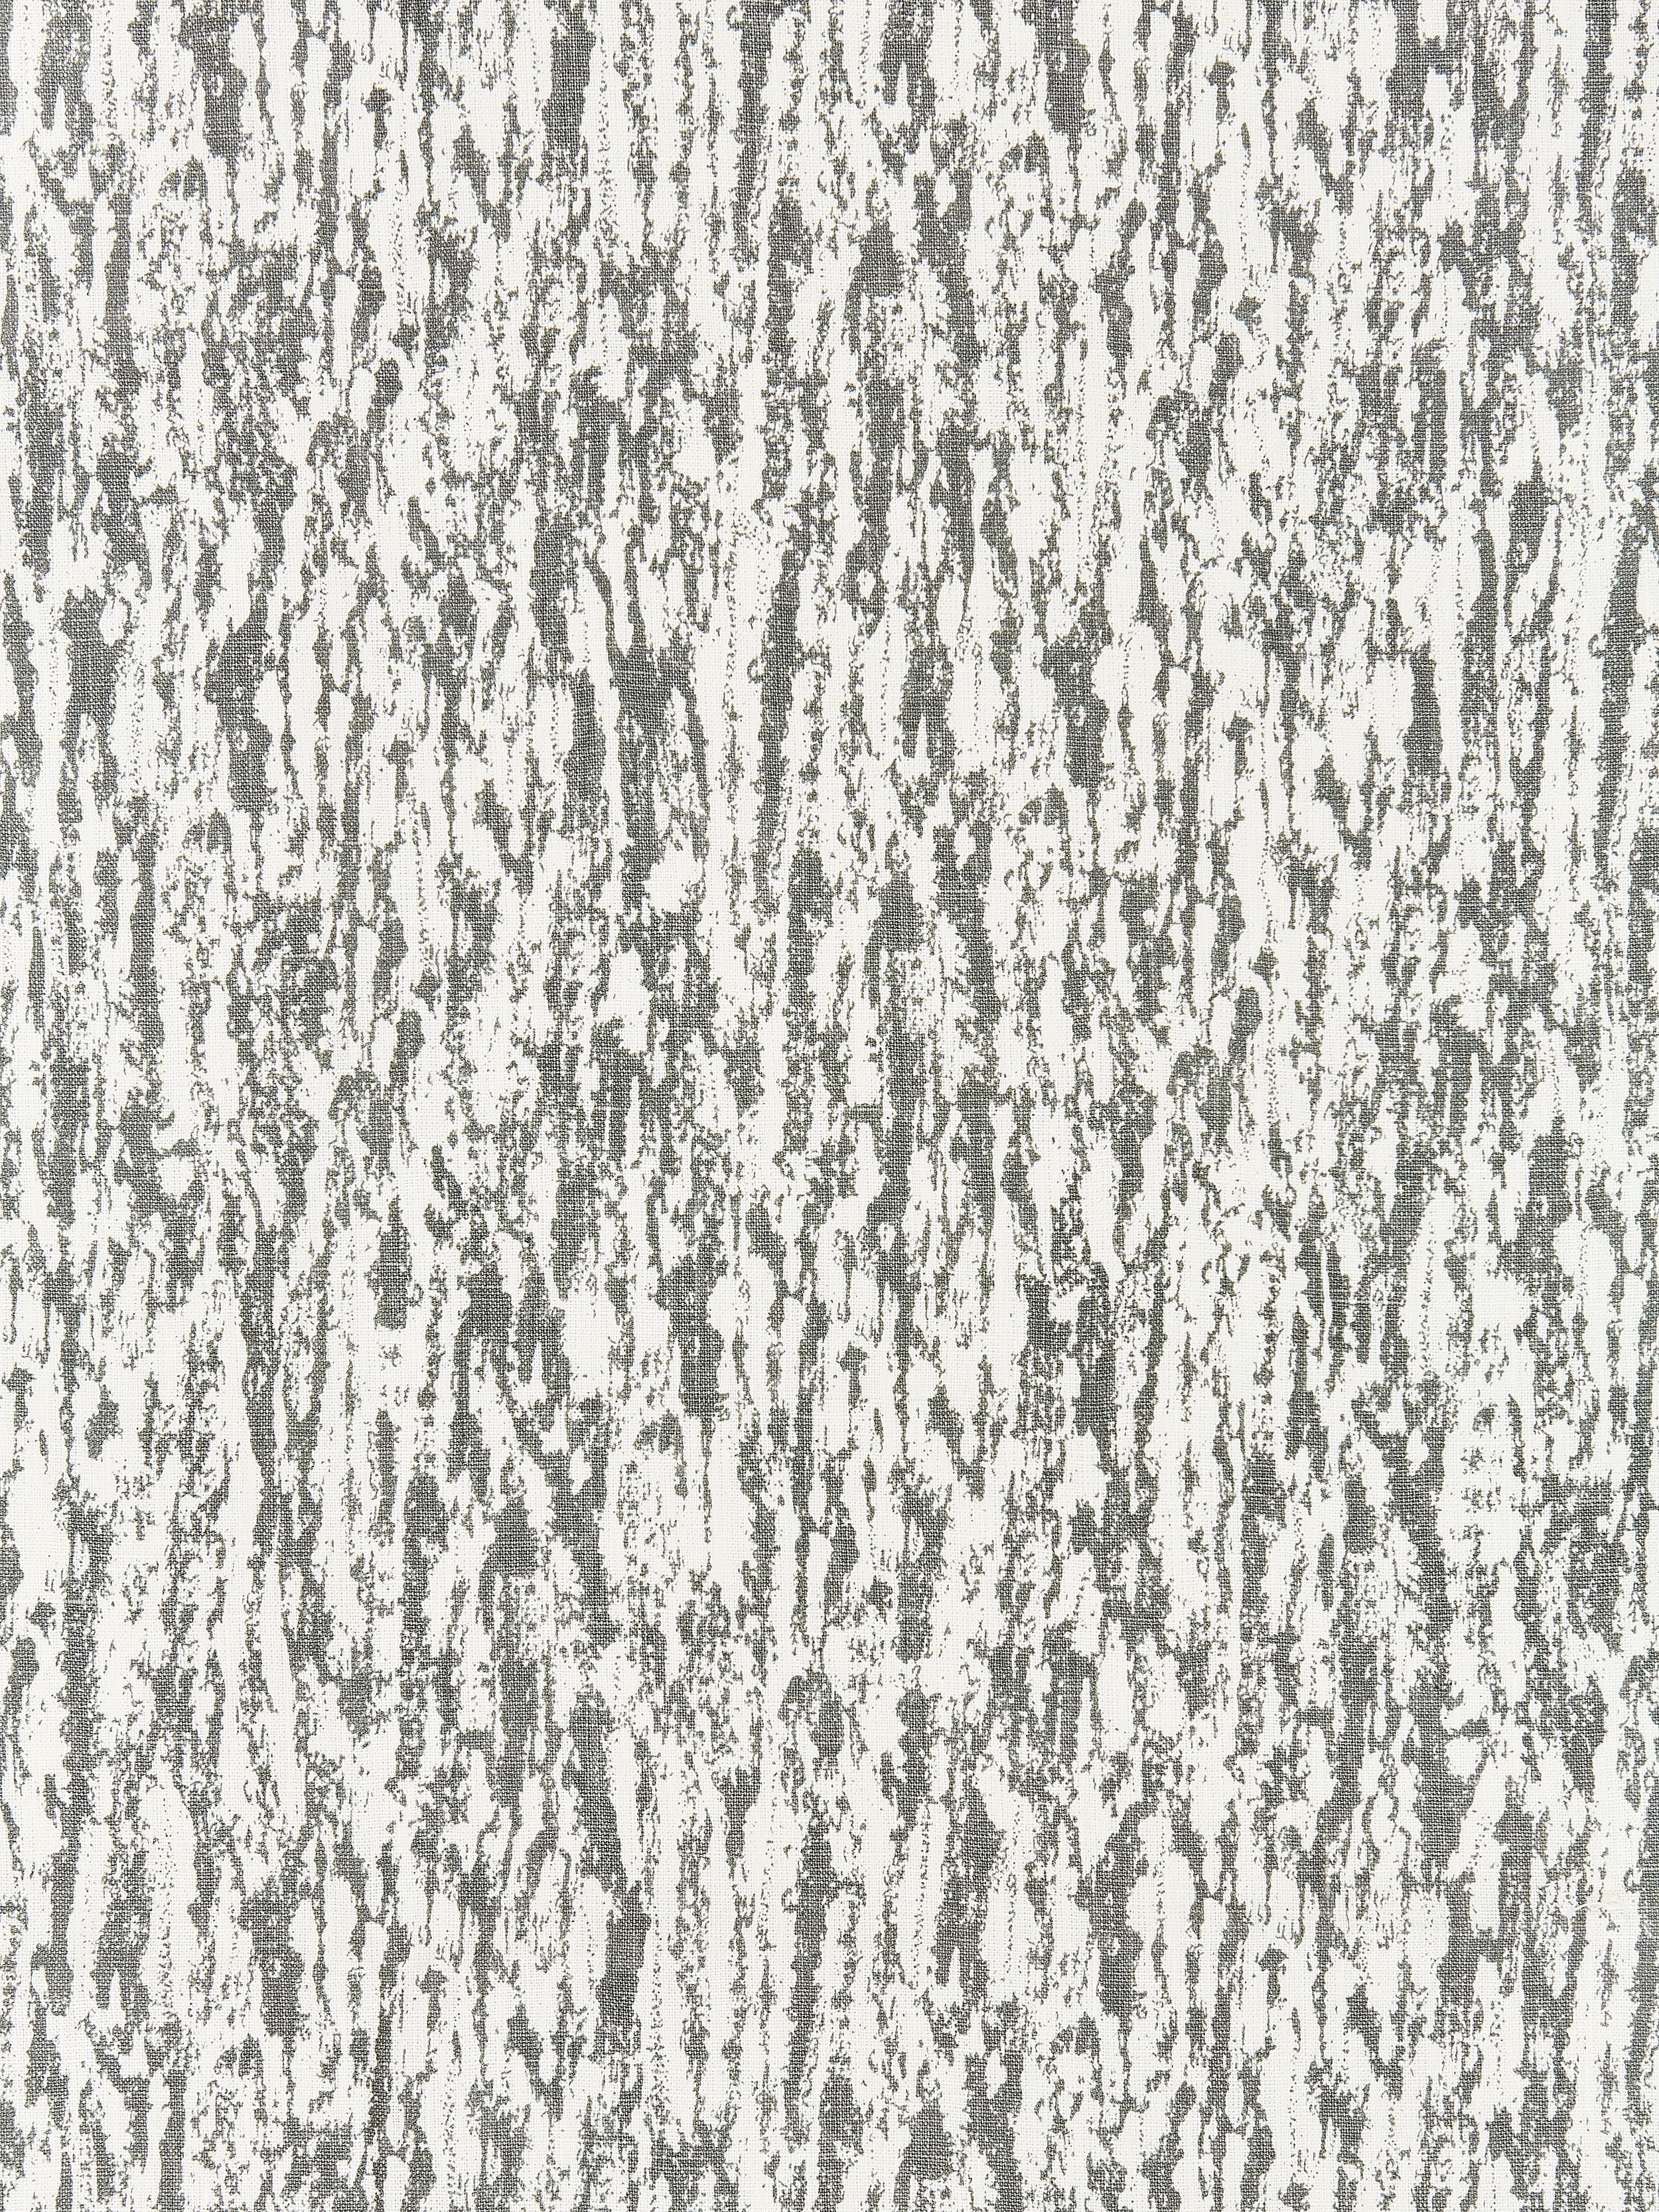 Sequoia Linen Print fabric in graphite color - pattern number SC 000416599 - by Scalamandre in the Scalamandre Fabrics Book 1 collection